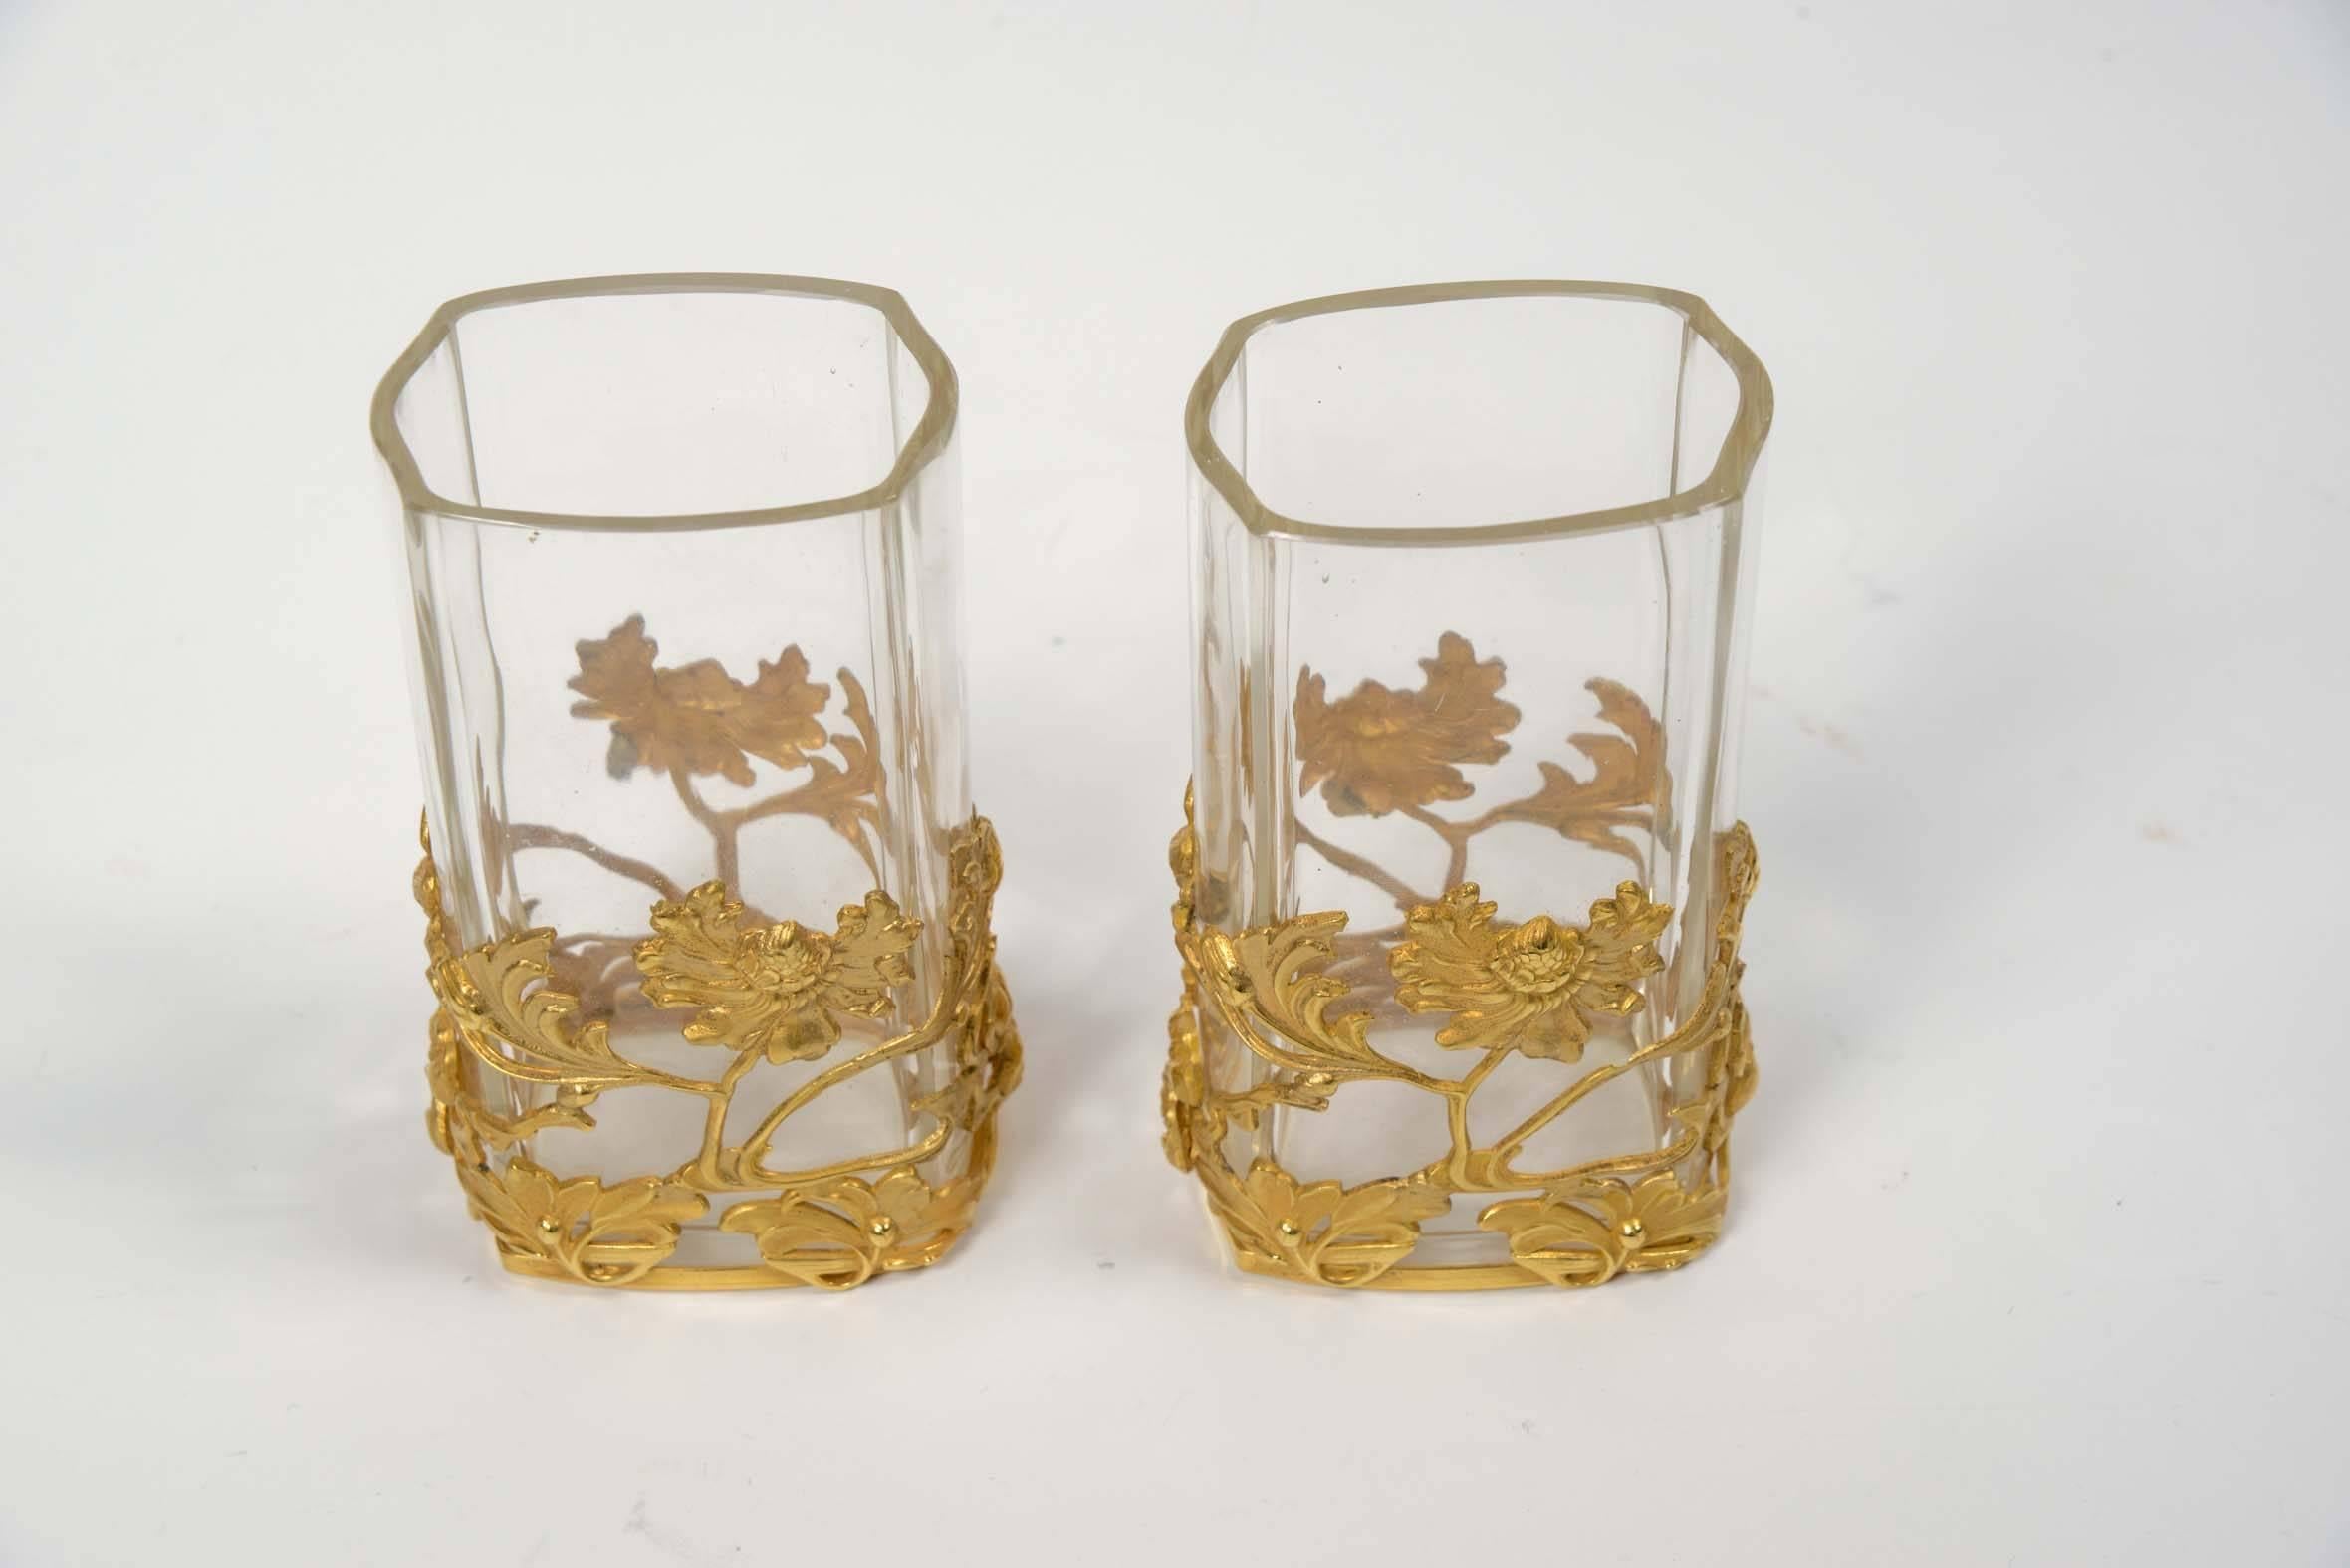 Pair of vases - Baccarat crystal and gilded bronzes.